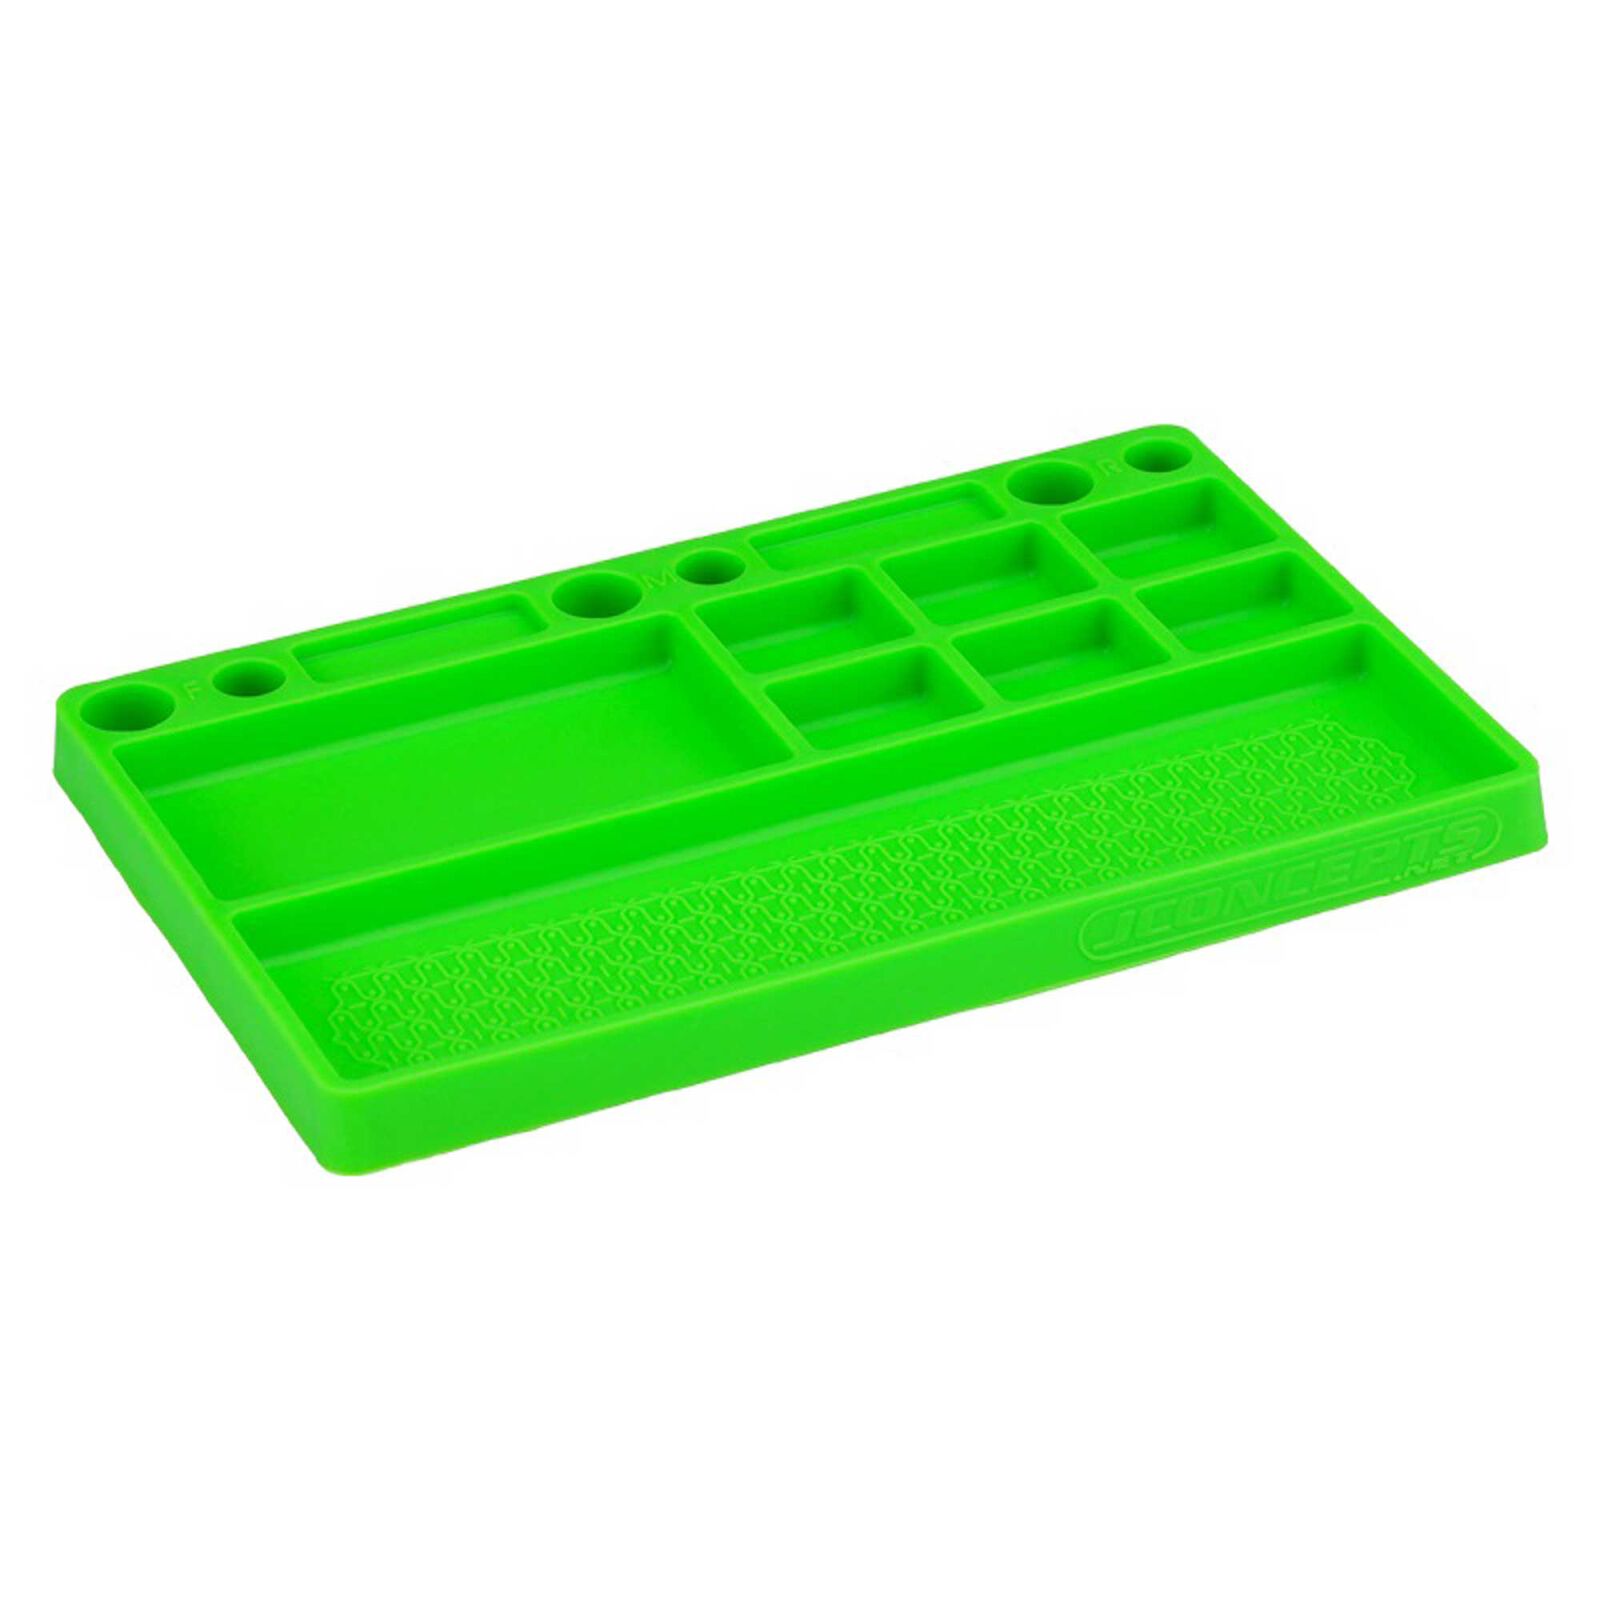 Parts Tray Rubber Material, Green